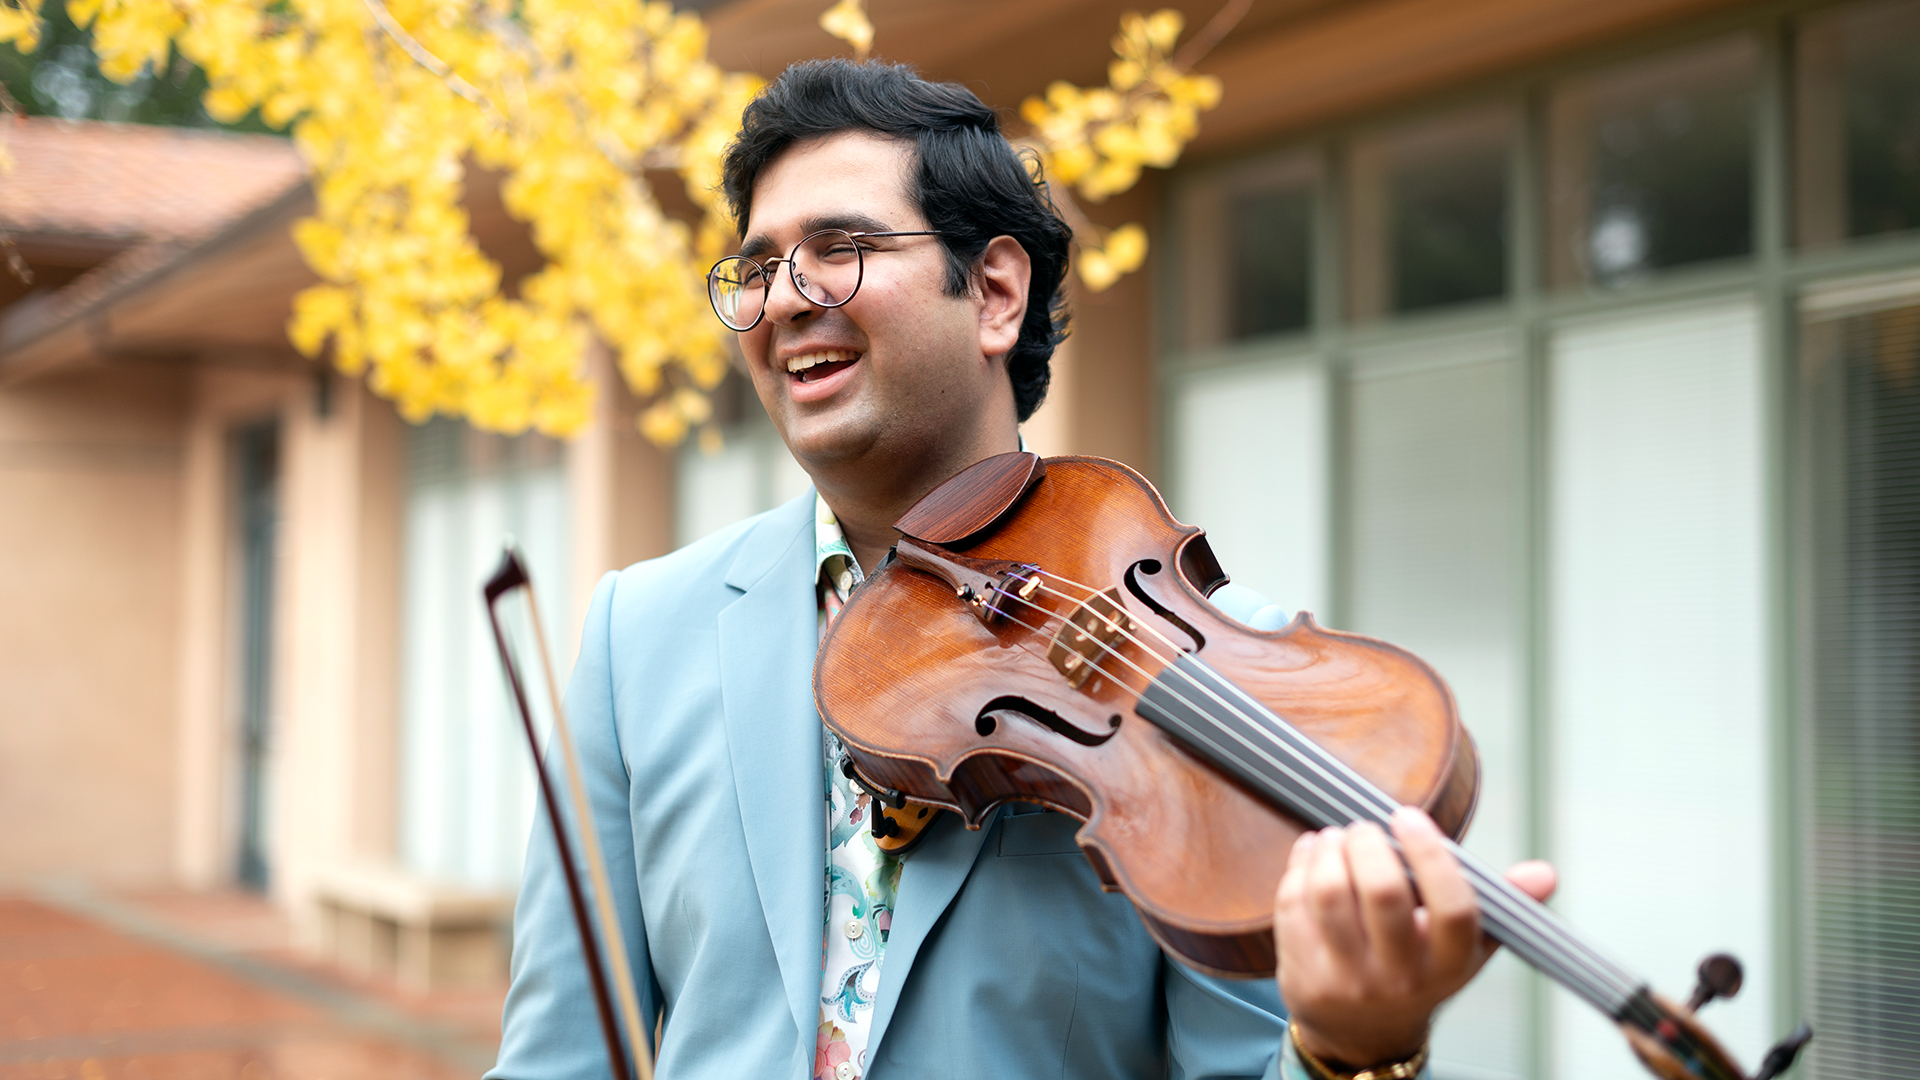 Saagar, with short dark hair and glasses, wearing a powder blue suit, holds a viola to his chin while standing in a courtyard